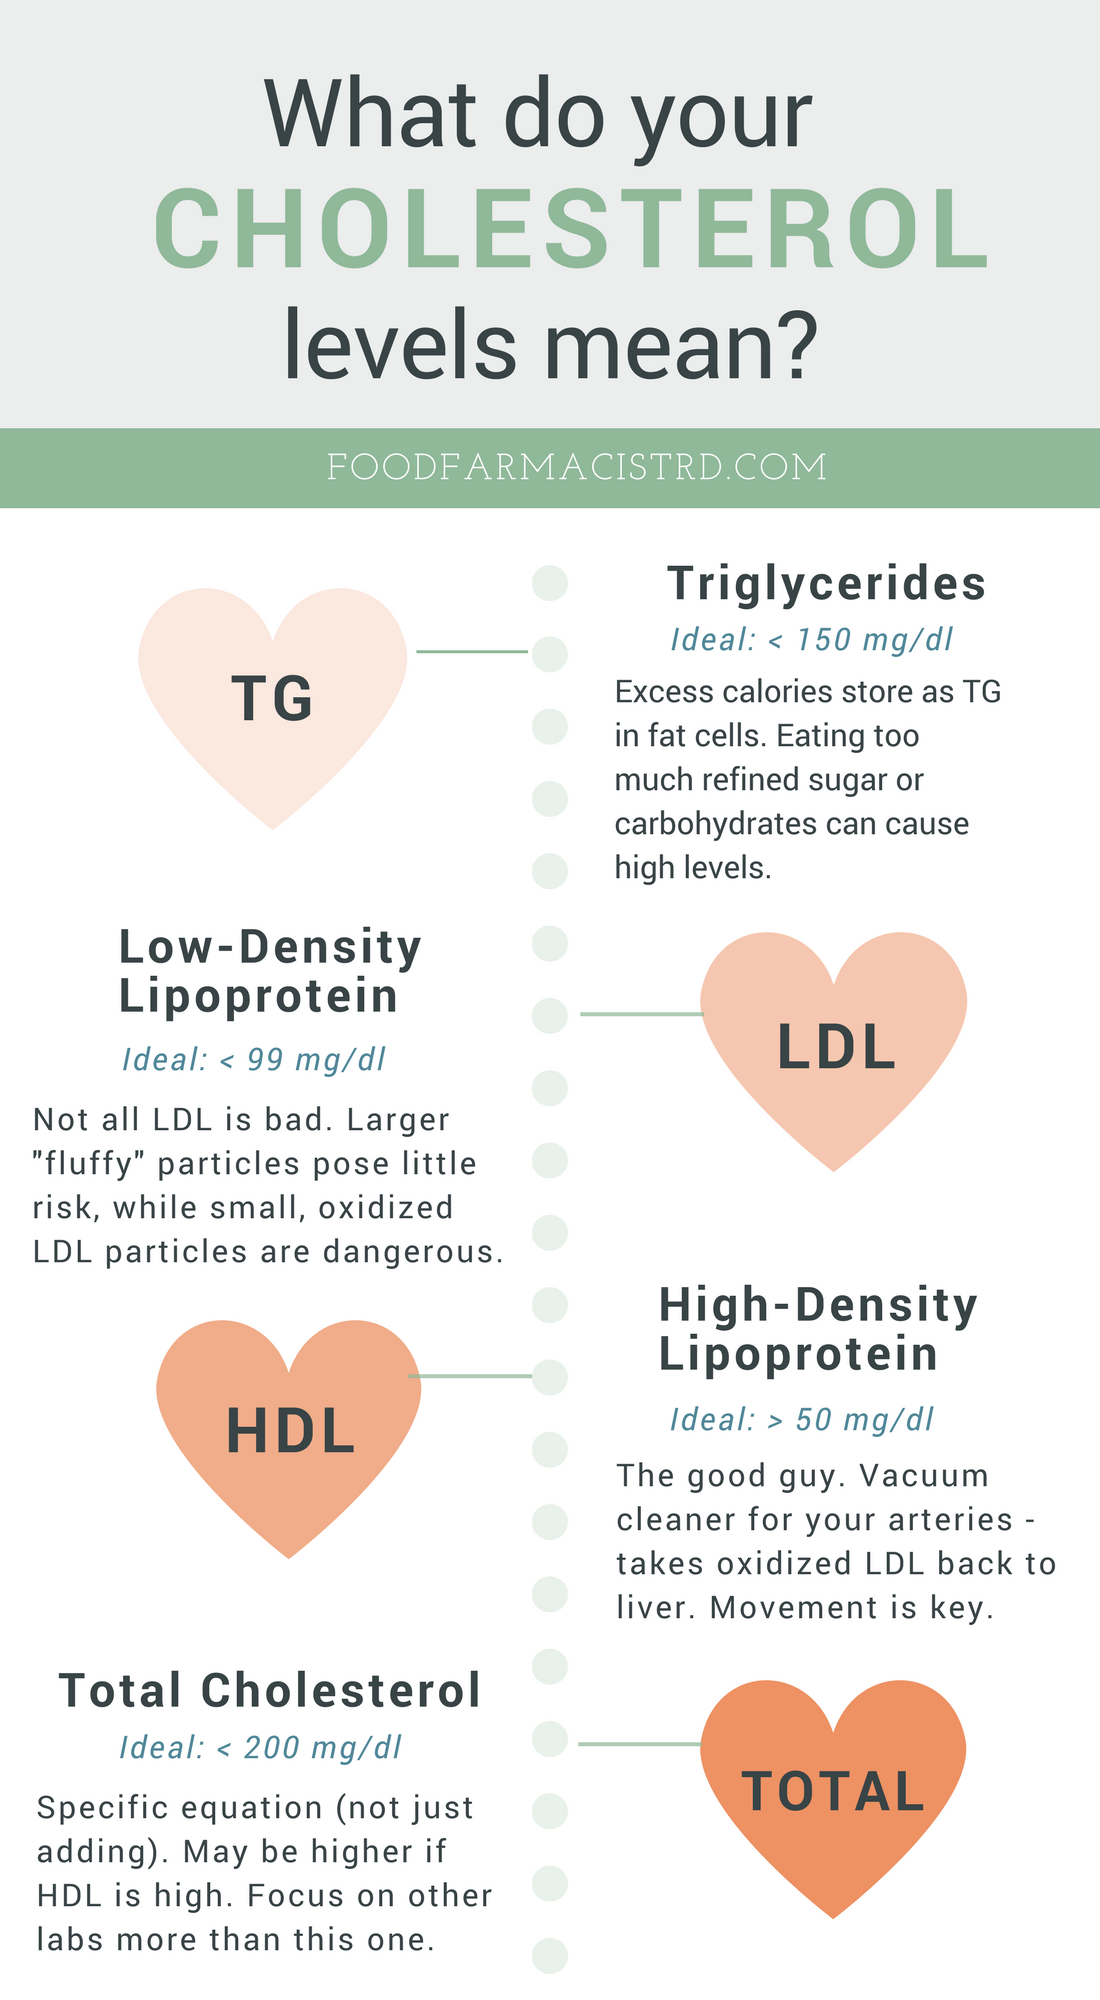 7 Ways to Lower Cholesterol Without Medication